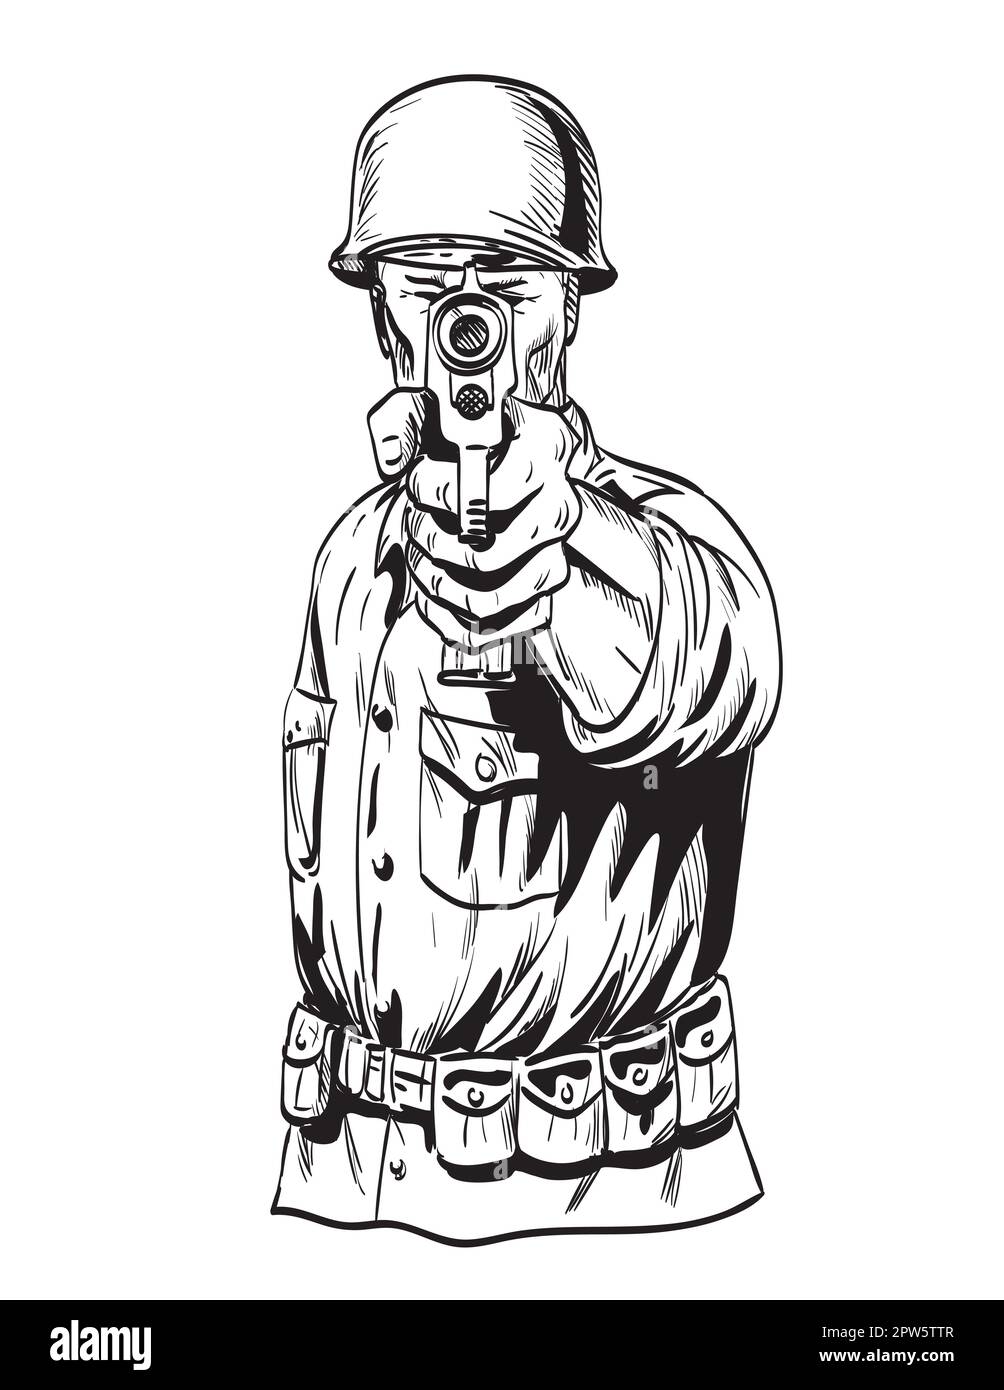 Comics style drawing or illustration of a World War Two American GI soldier aiming pistol viewed from front on isolated background in black and white Stock Photo